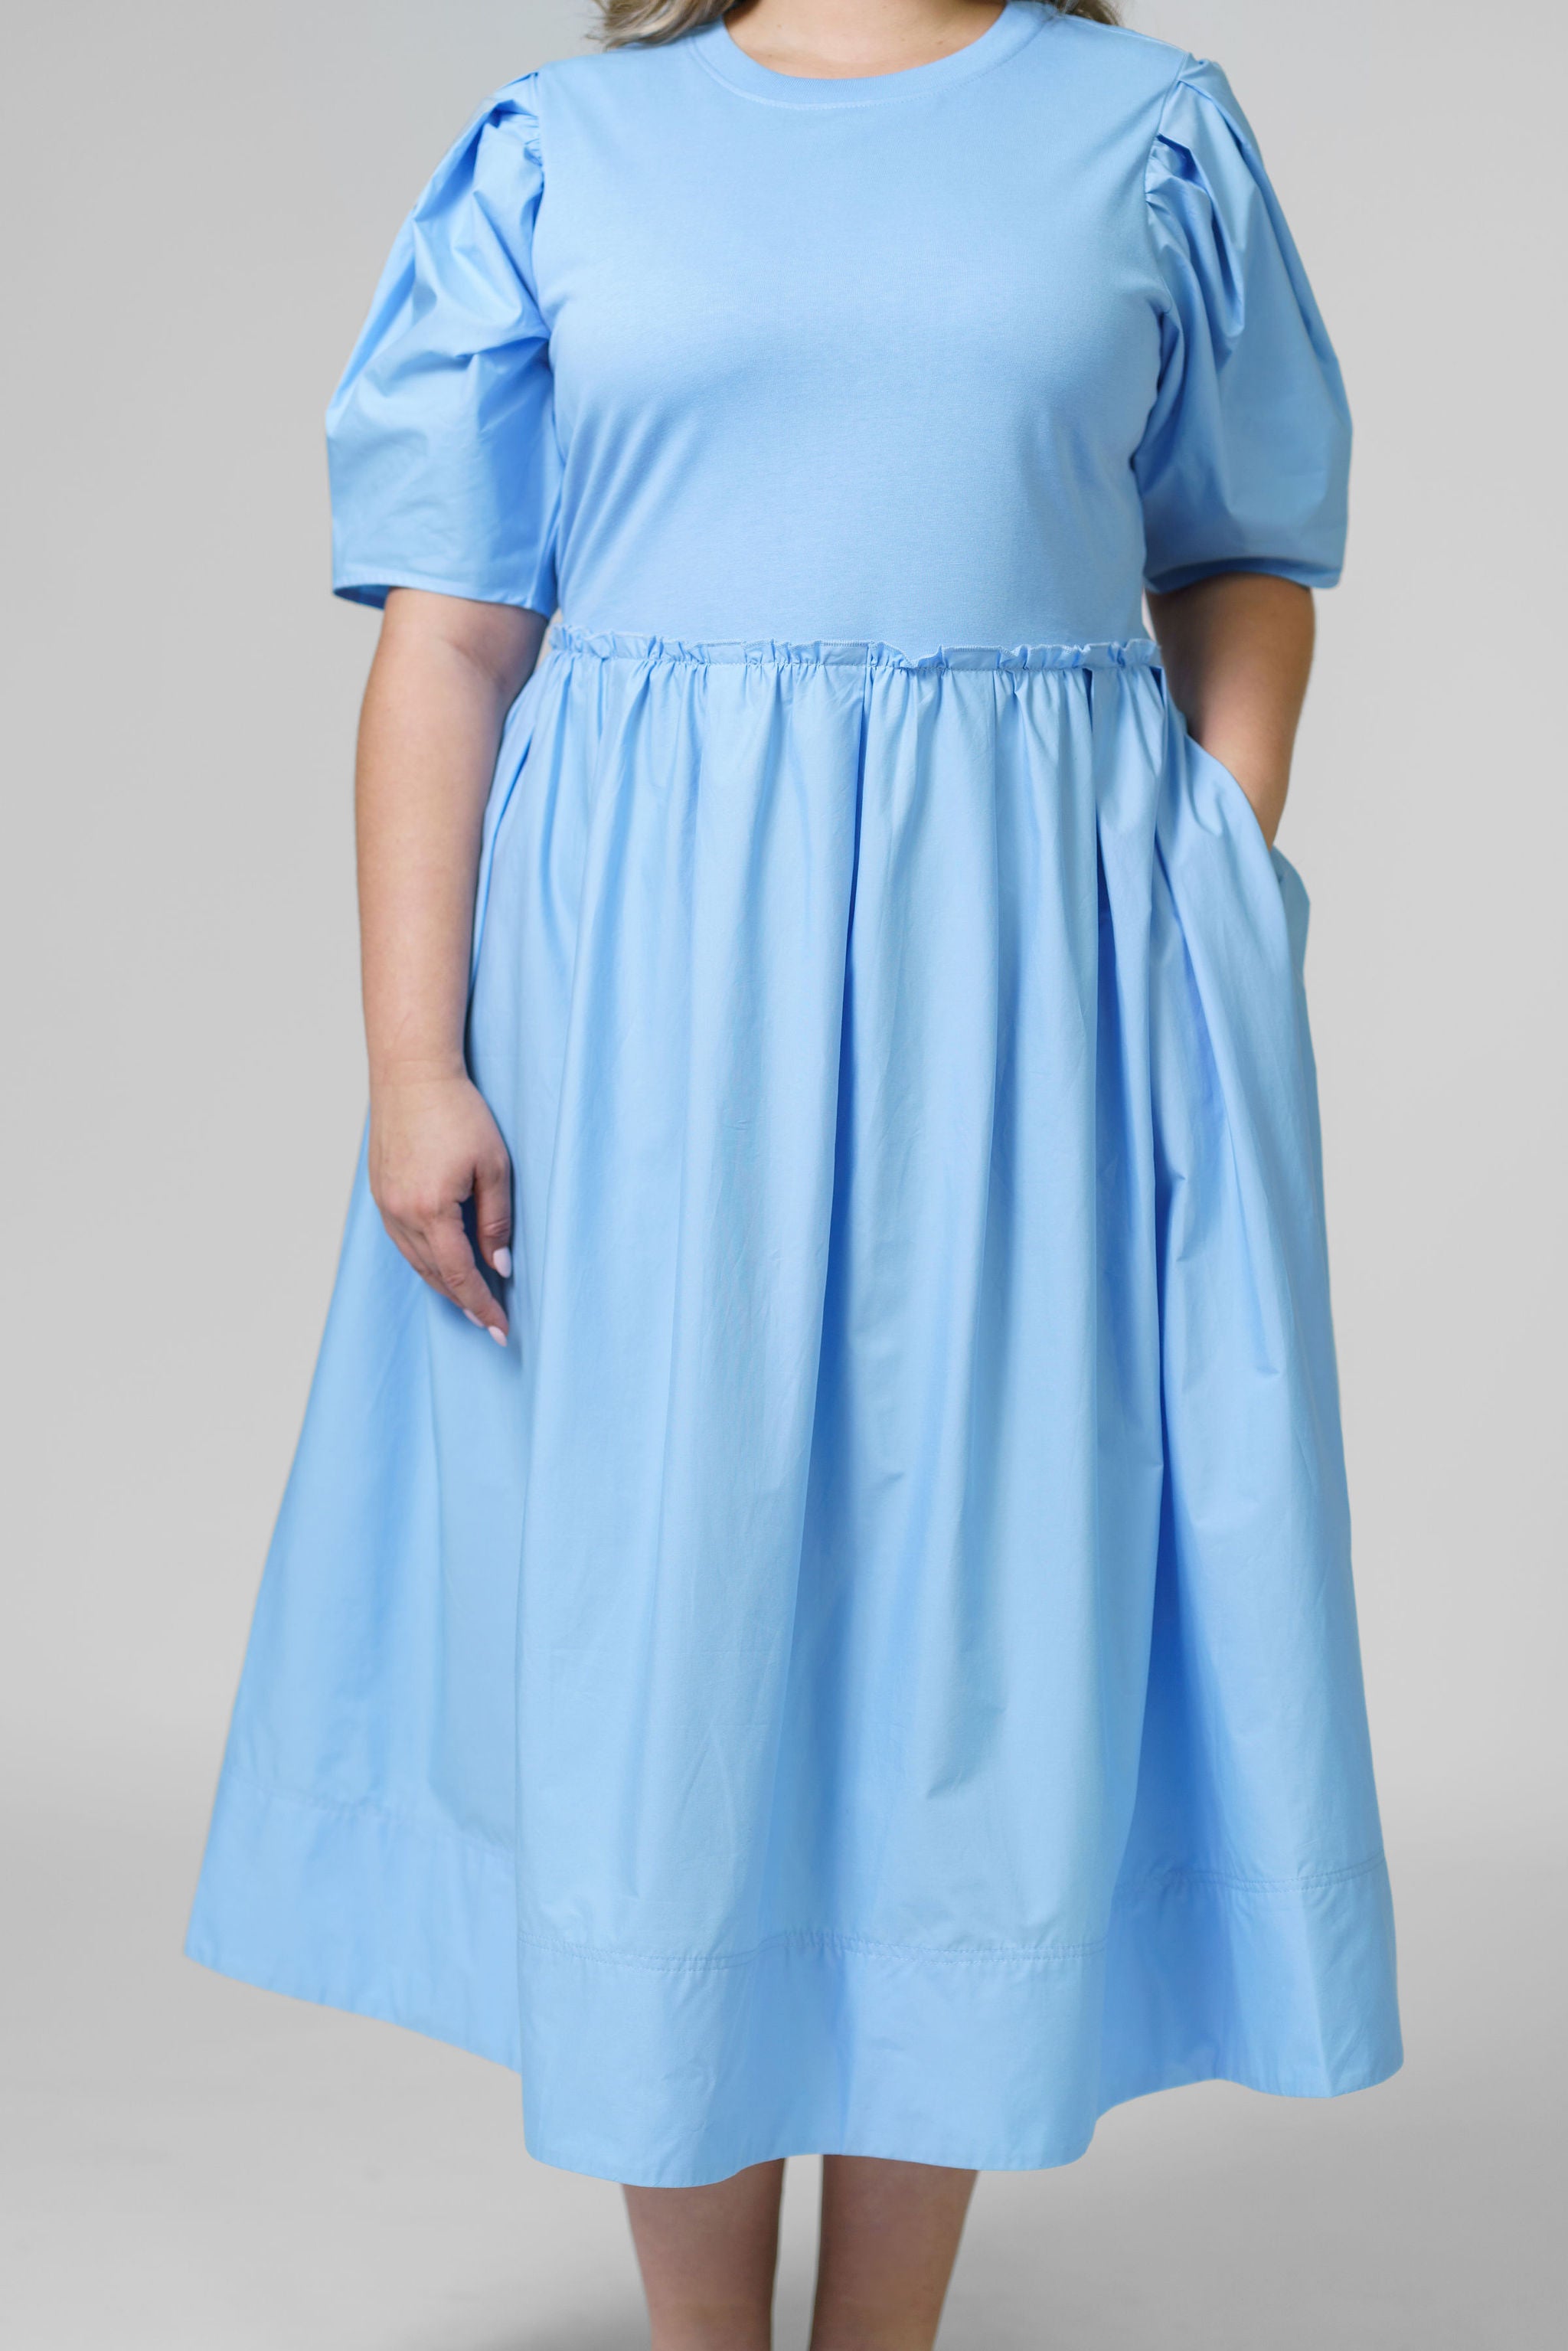 ADELAIDE DRESS - AMOUR781